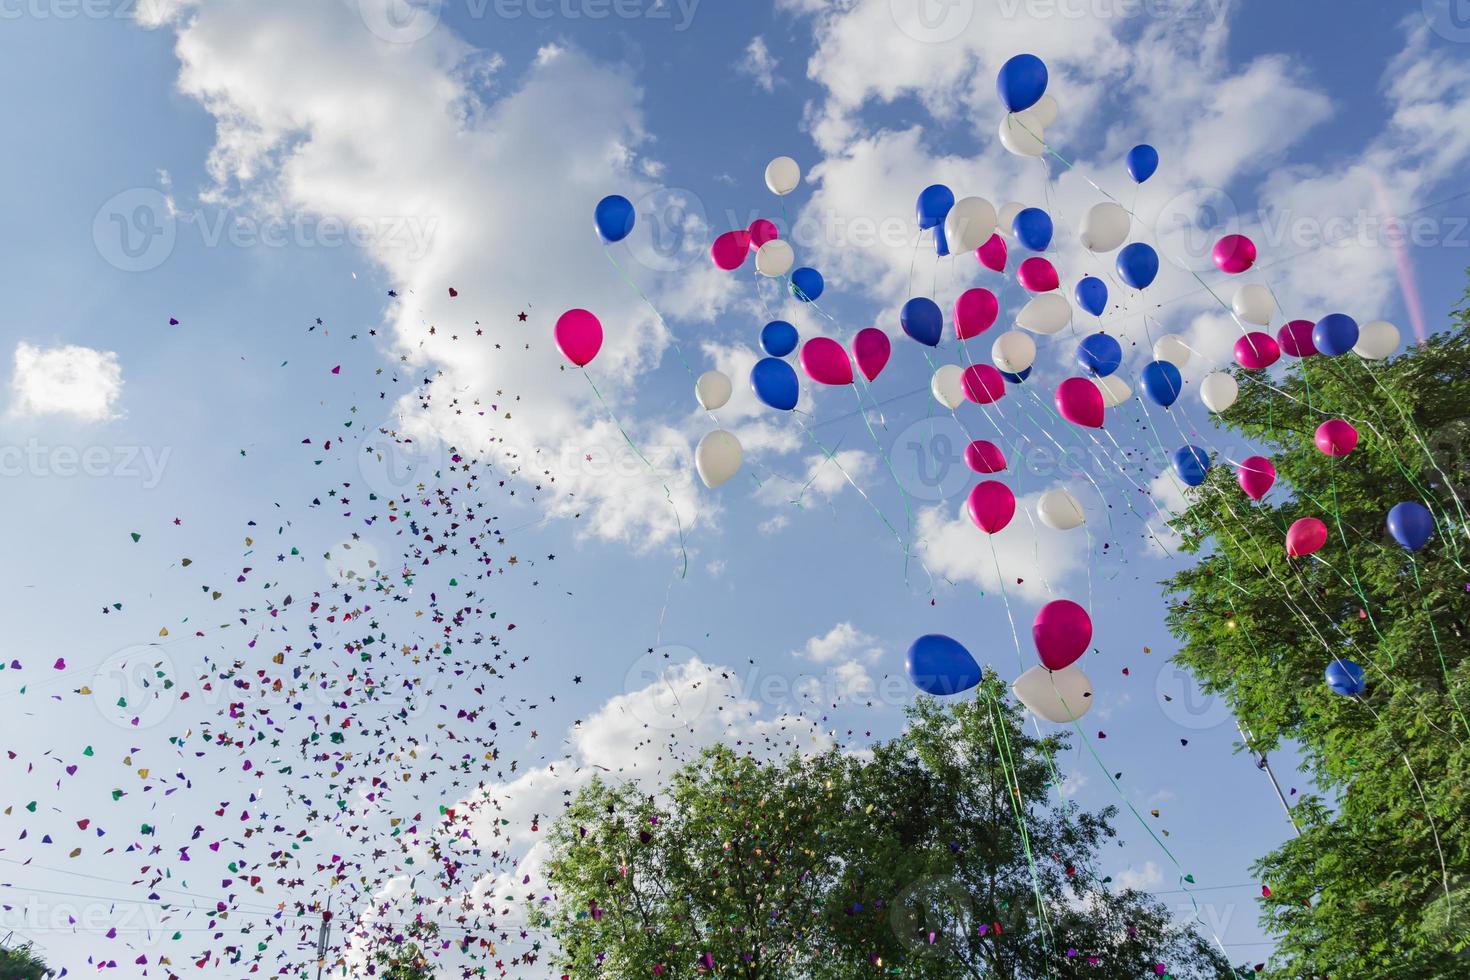 Multicolored balloons and confetti released in the blue sky against background of trees. Festive action photo